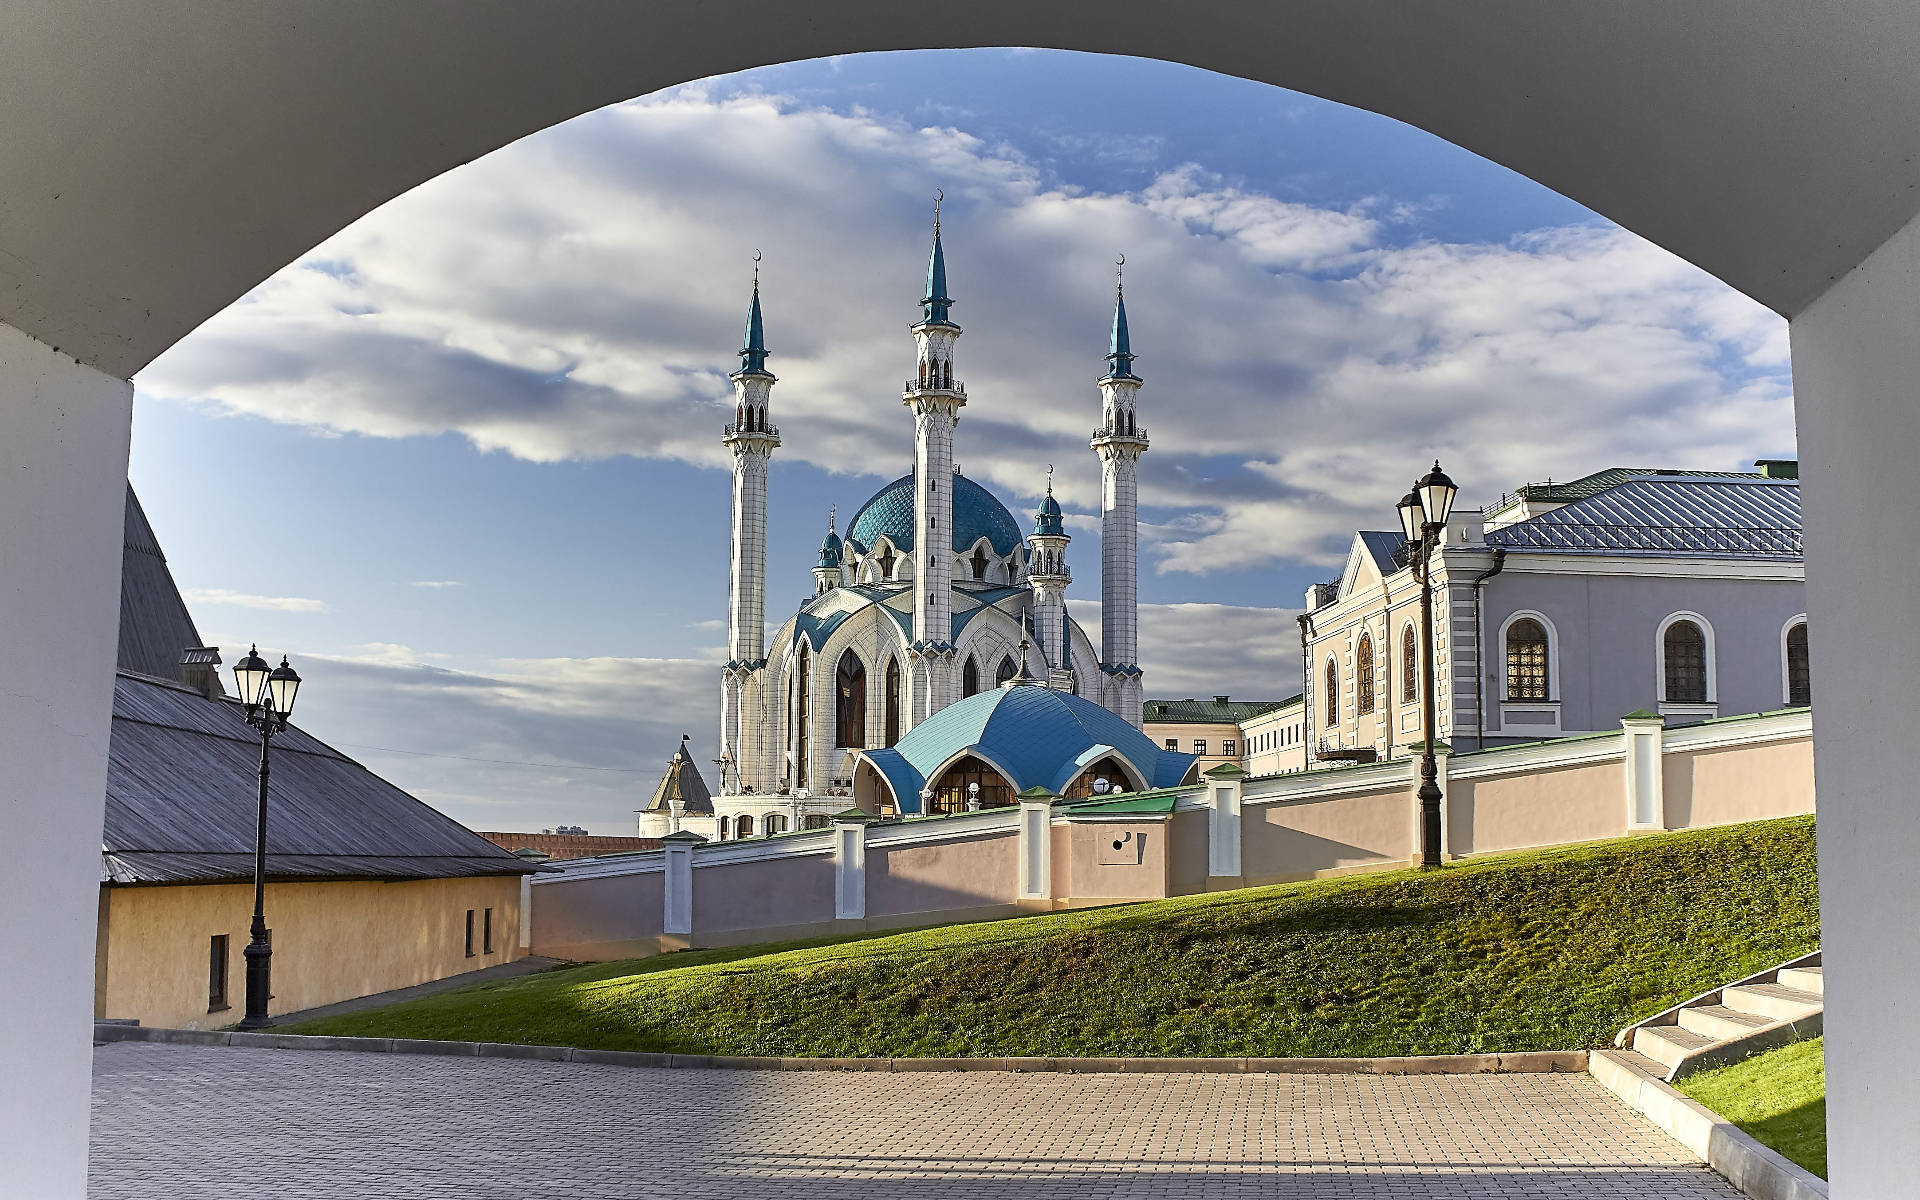 "Blue Domes of the Kazan Mosque" Wallpaper